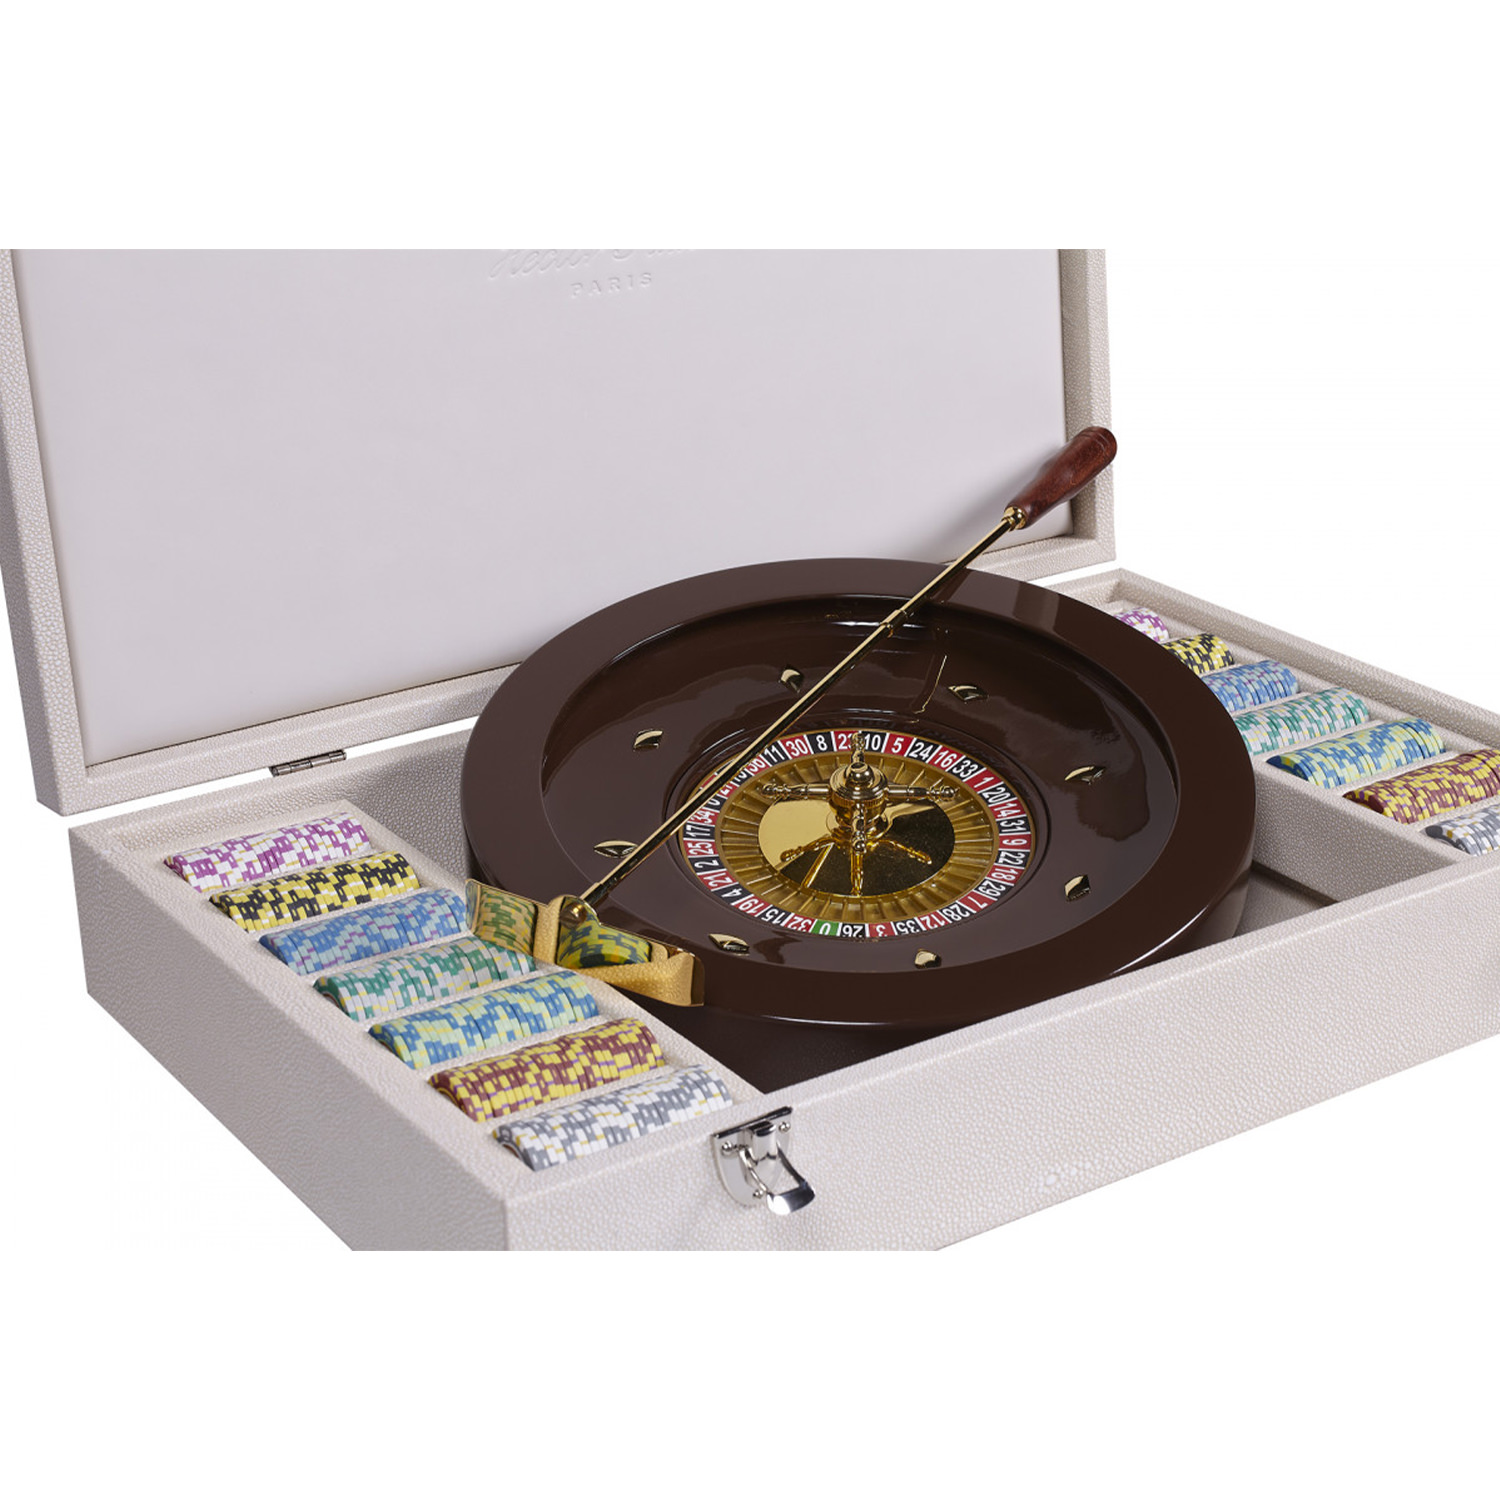 Coffret roulette galuchat beige - Hector saxe